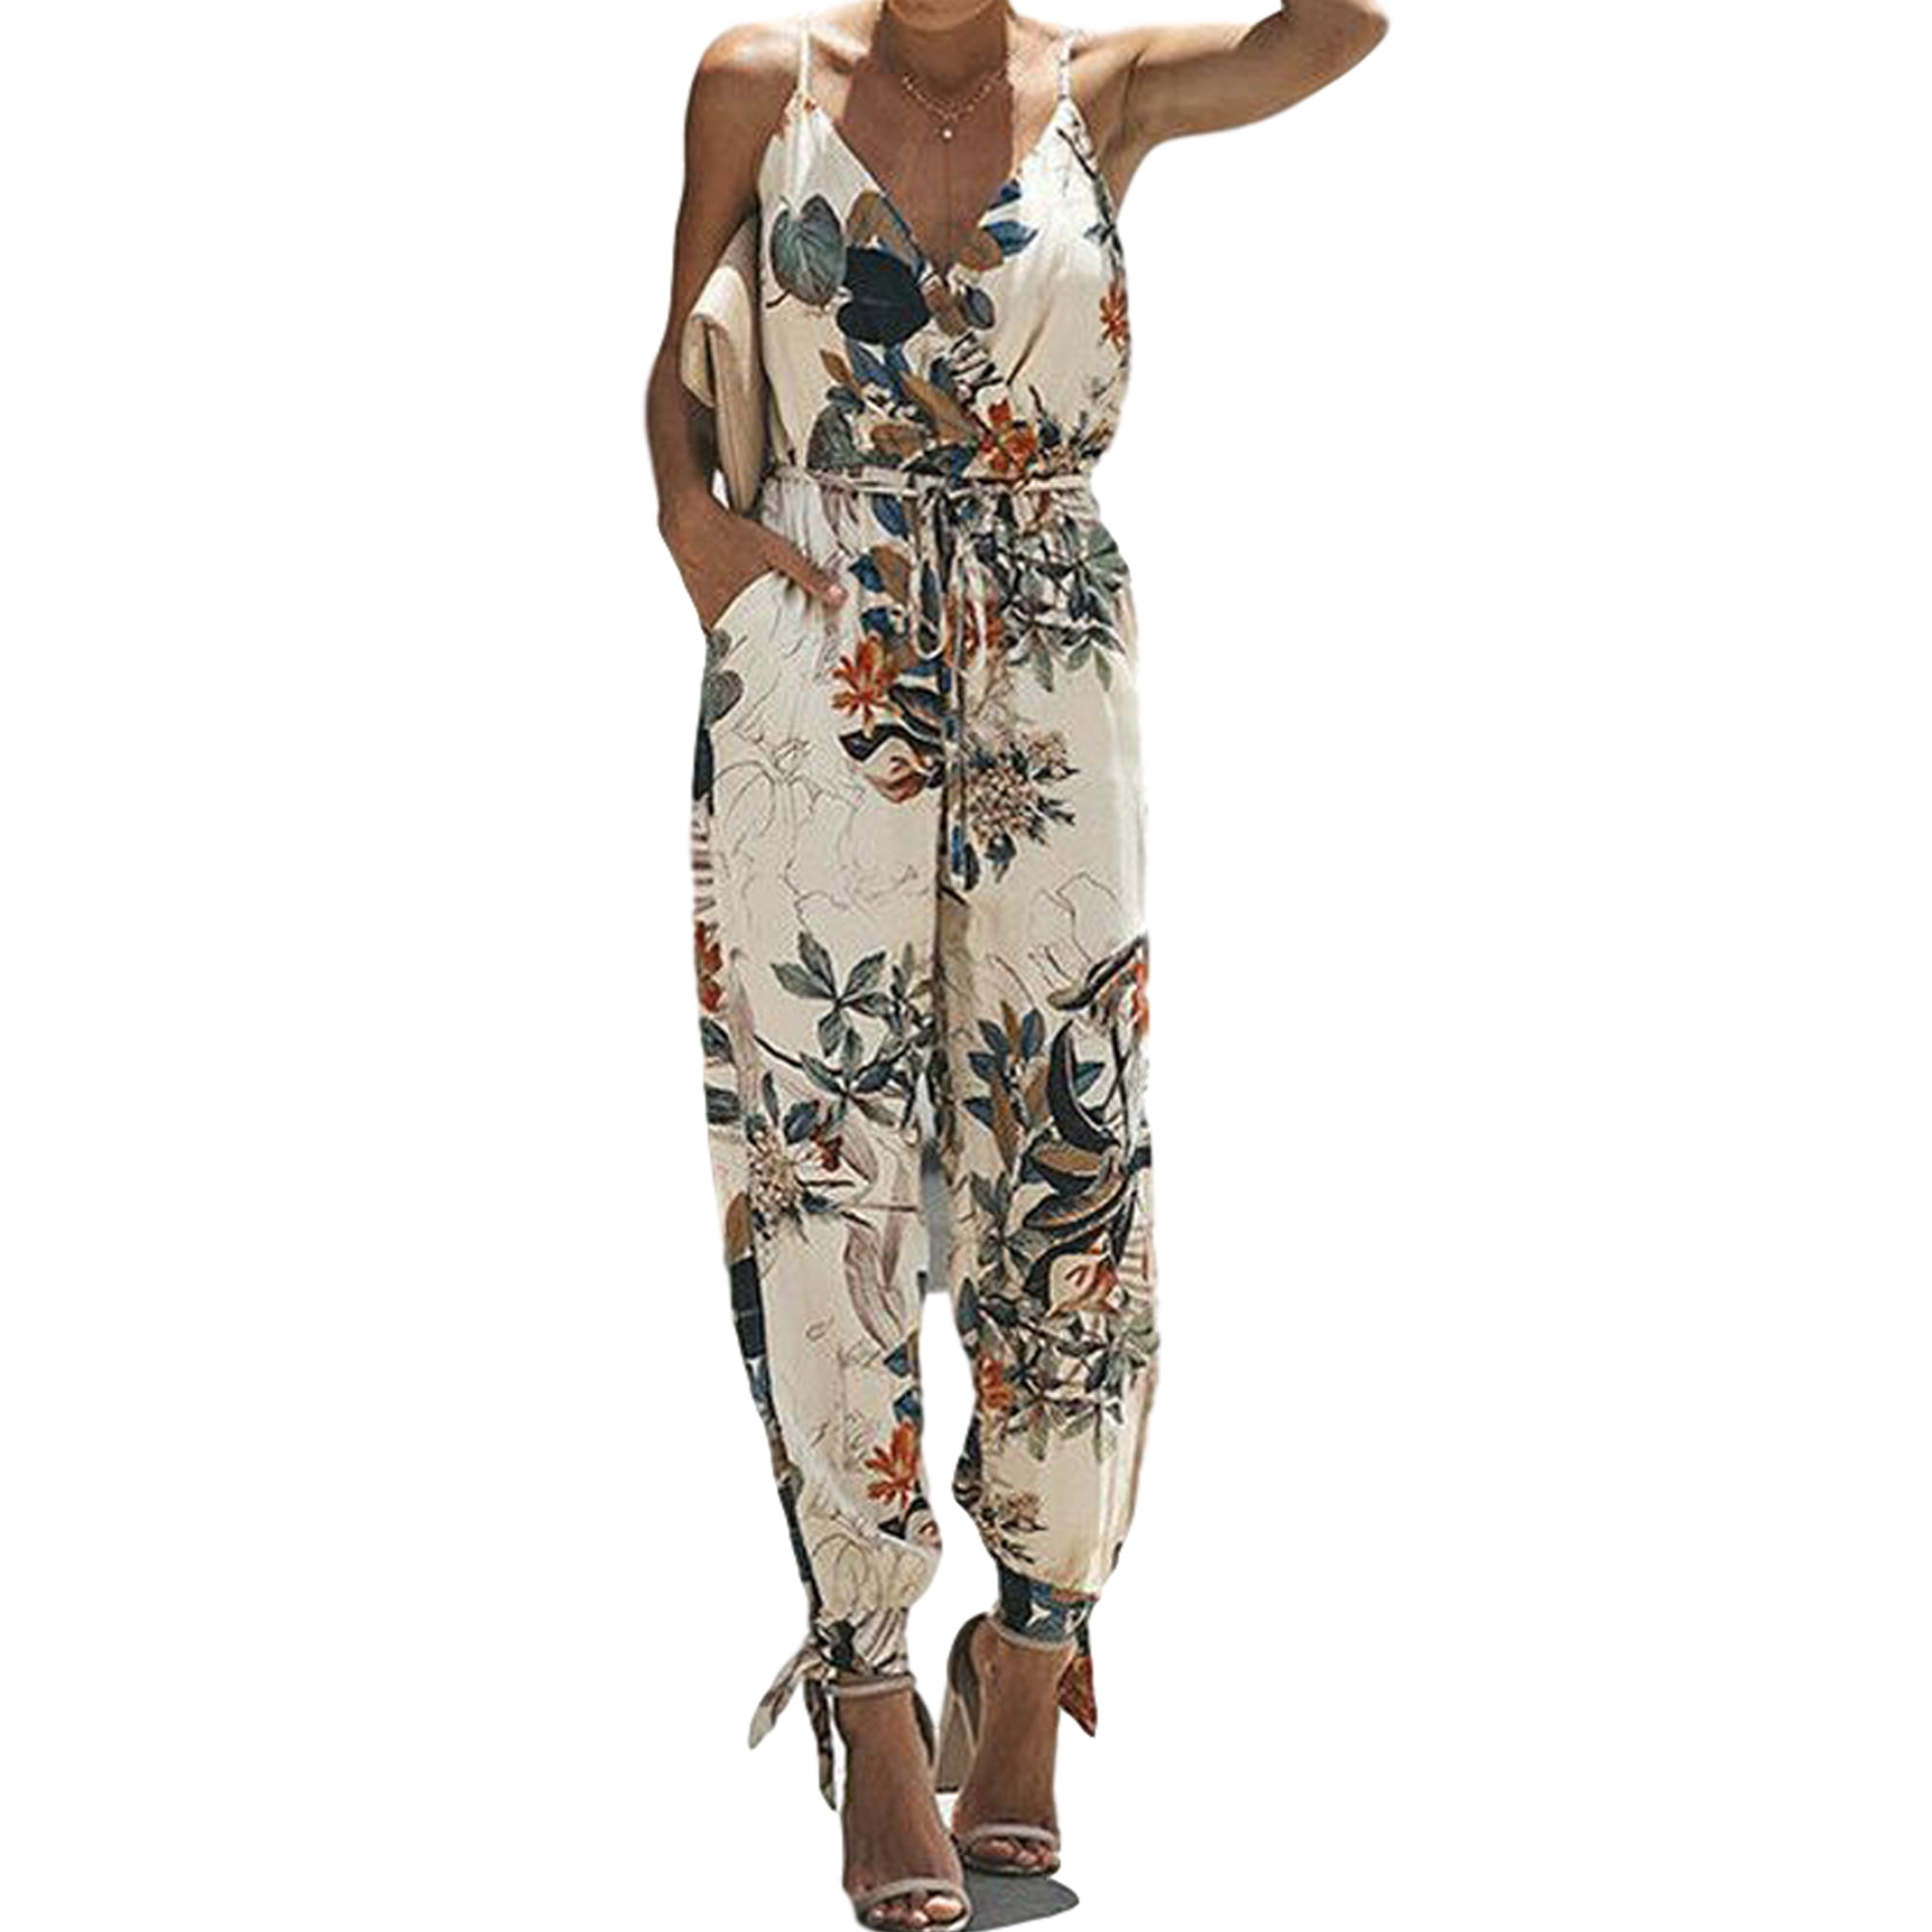 WSEVYPO Women Floral Baggy Trousers Overalls Pants Solid Romper ...